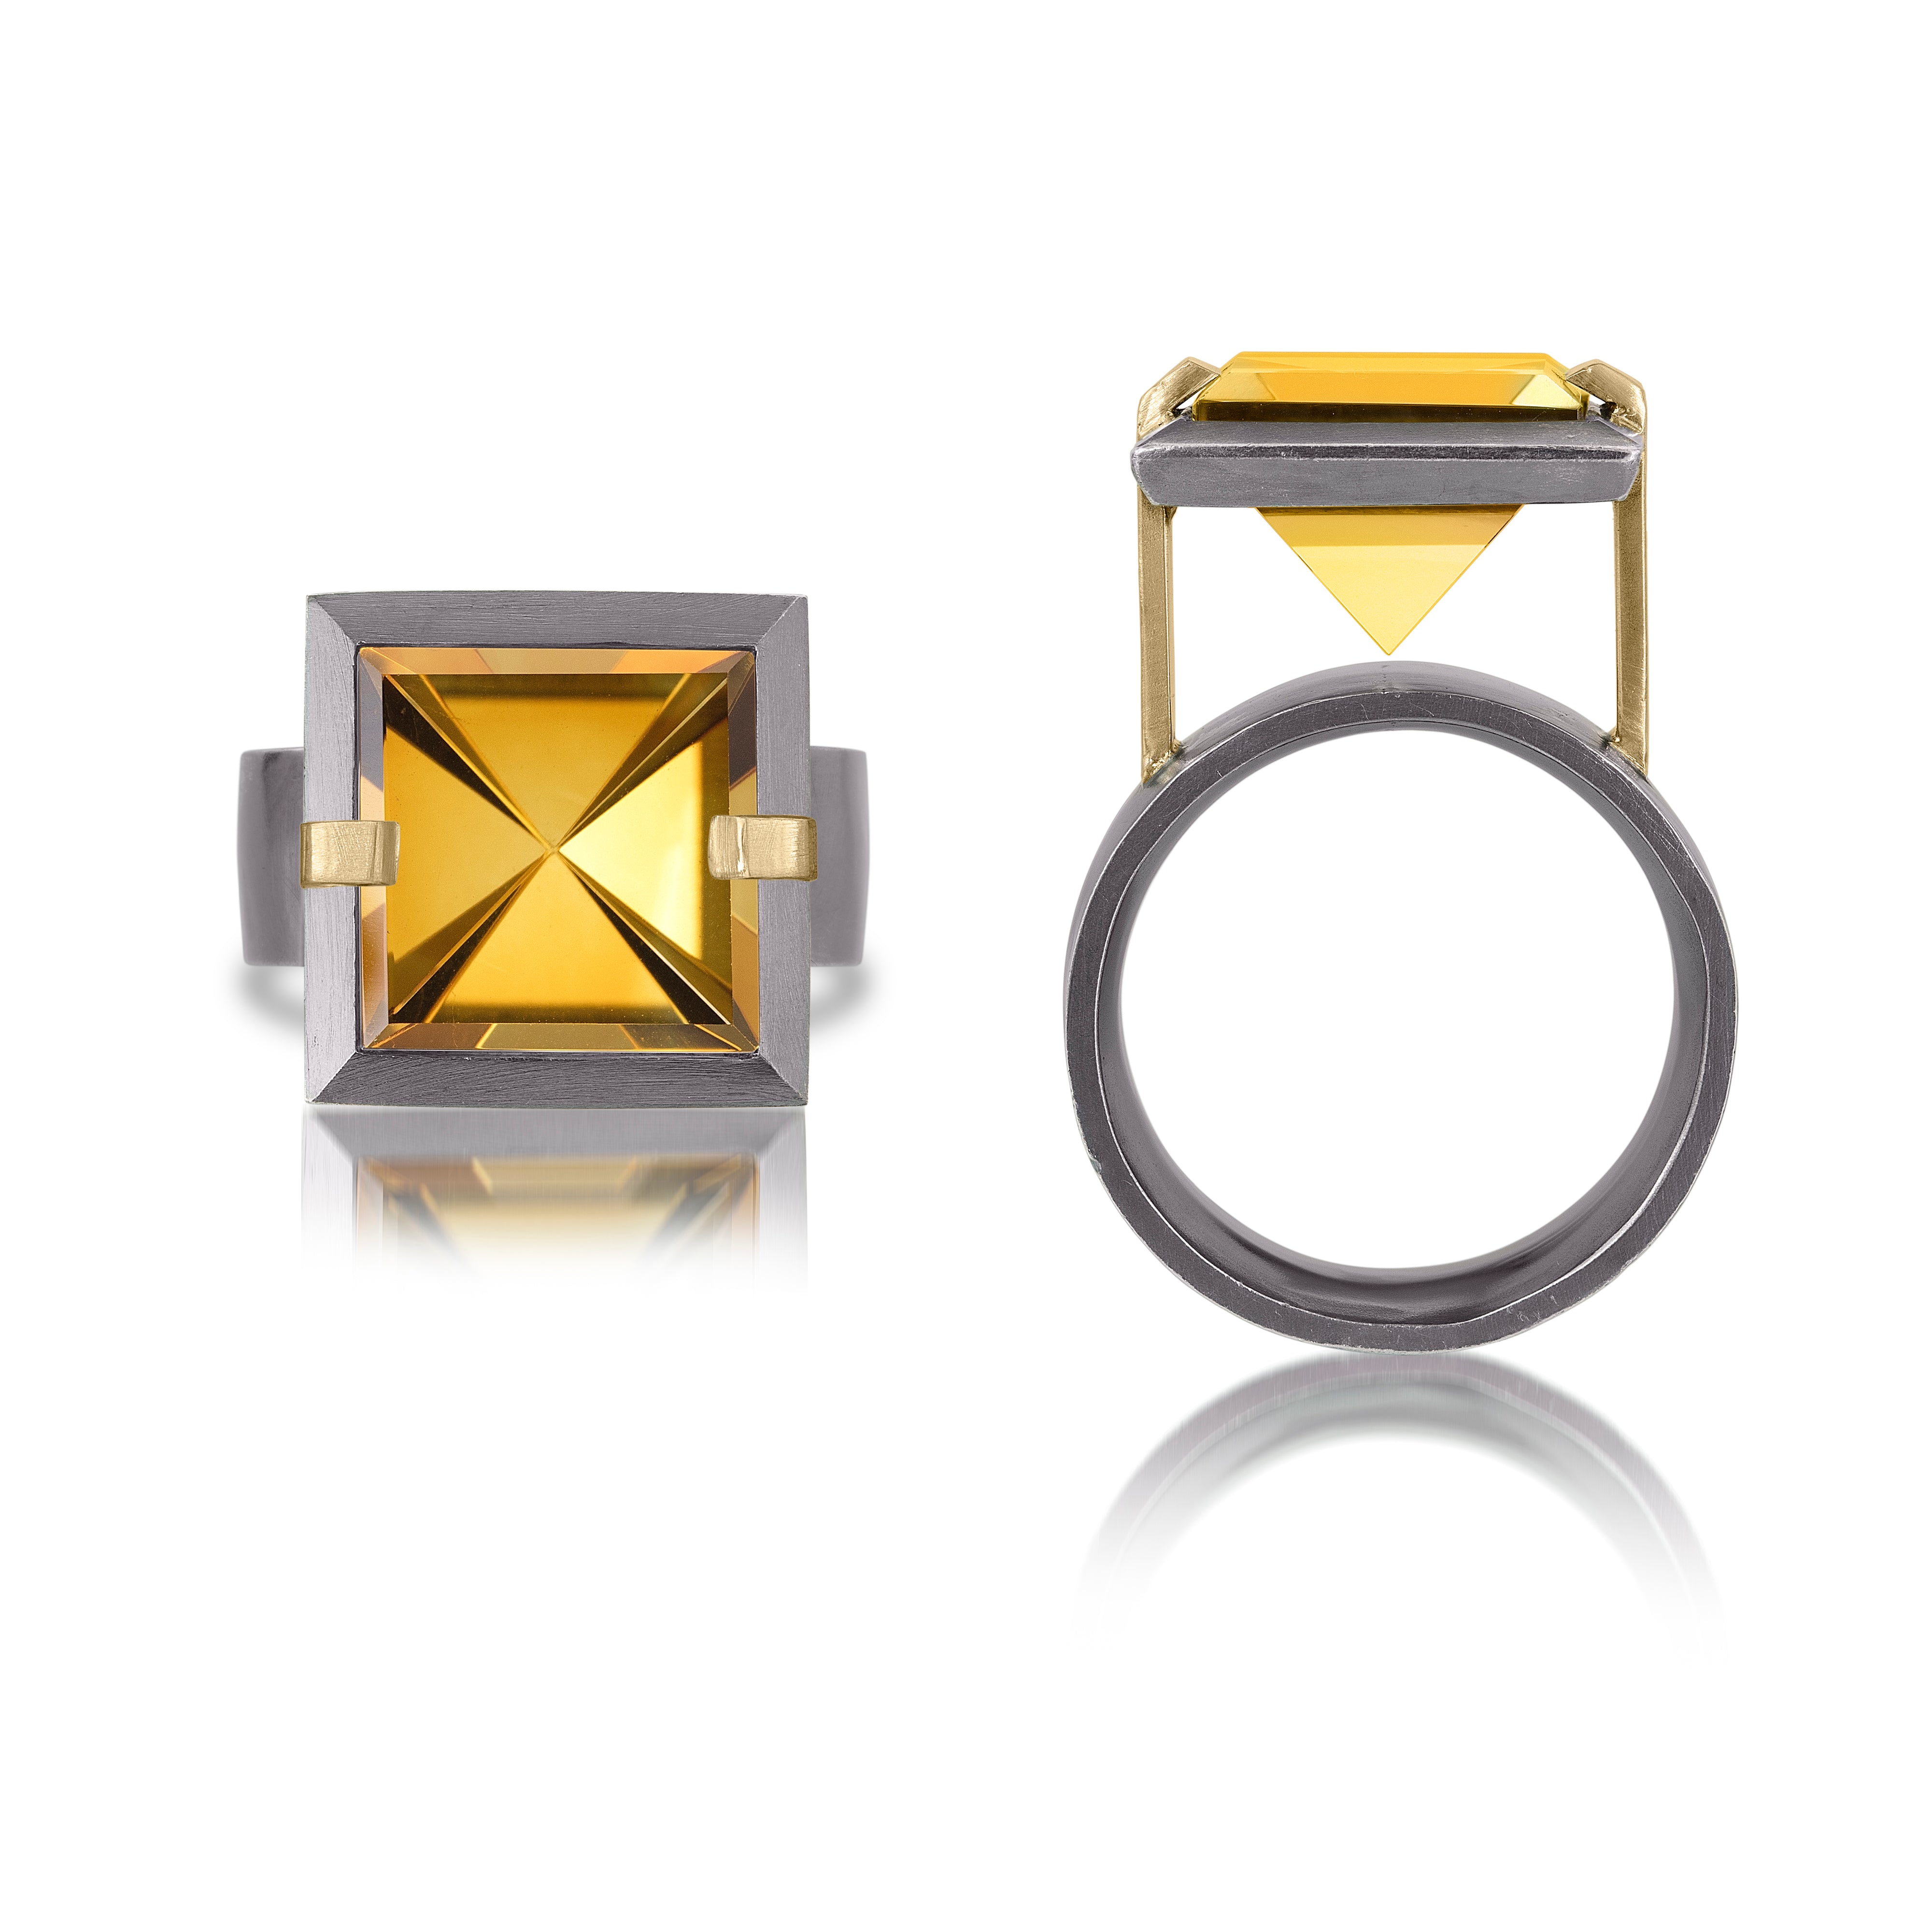 This medium style Facets ring is natural gemstone set in oxidized sterling and 18k gold. Crisp and sparkling faceted squares of gemstone are elevated and framed in oxidized silver accented with 18k gold prongs.  The ring features an oxidized sterling comfort band.  Gemstone 6.32- 7.28 tcw.